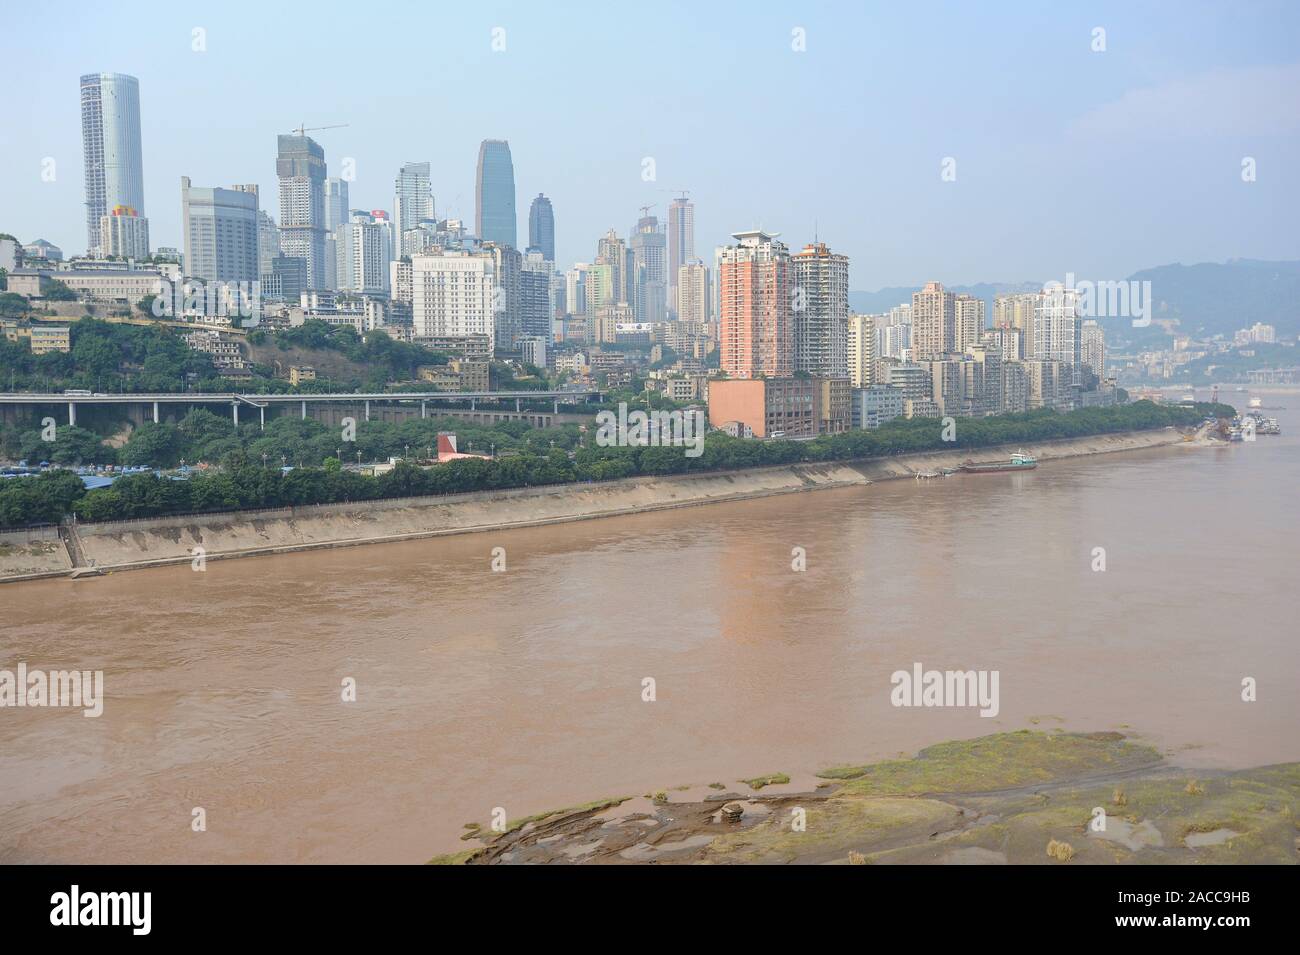 04.08.2012, Chongqing, China - Elevated view of the city on the shore of the Yangtze River. The megacity is situated at the confluence of two rivers. Stock Photo